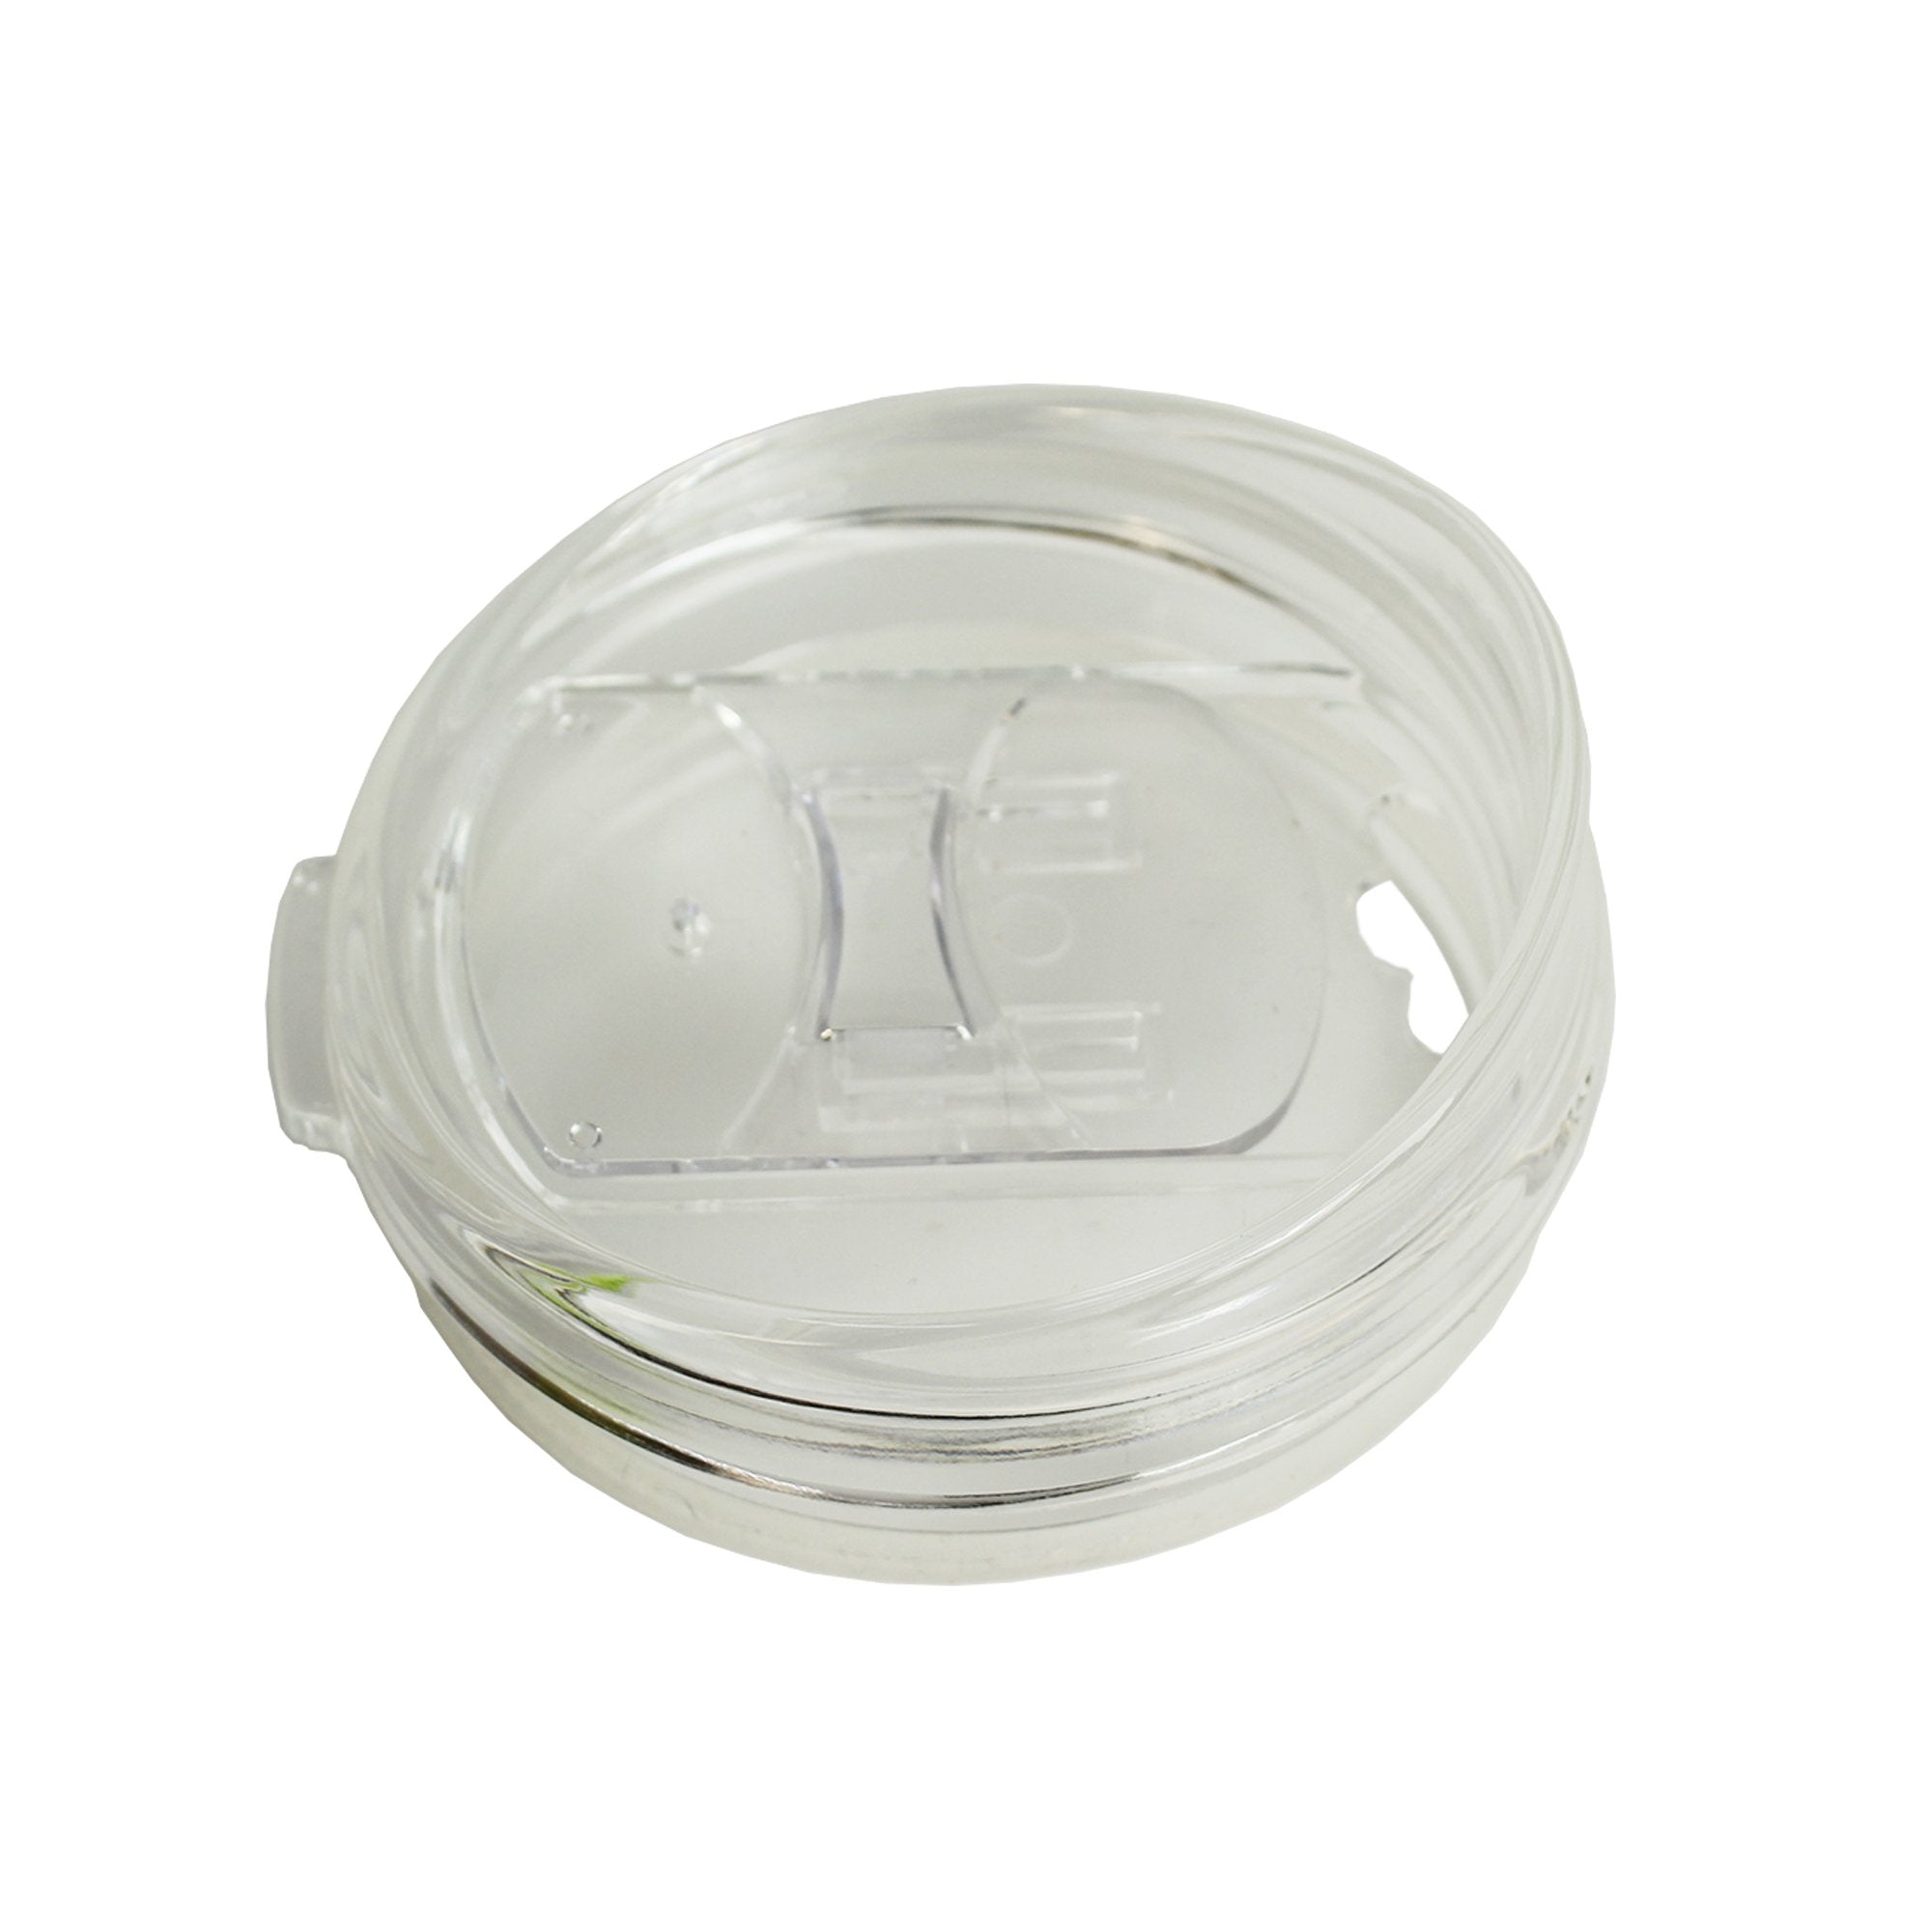 Transparent Replacement Lids For Stainless Steel Tumblers - Fits